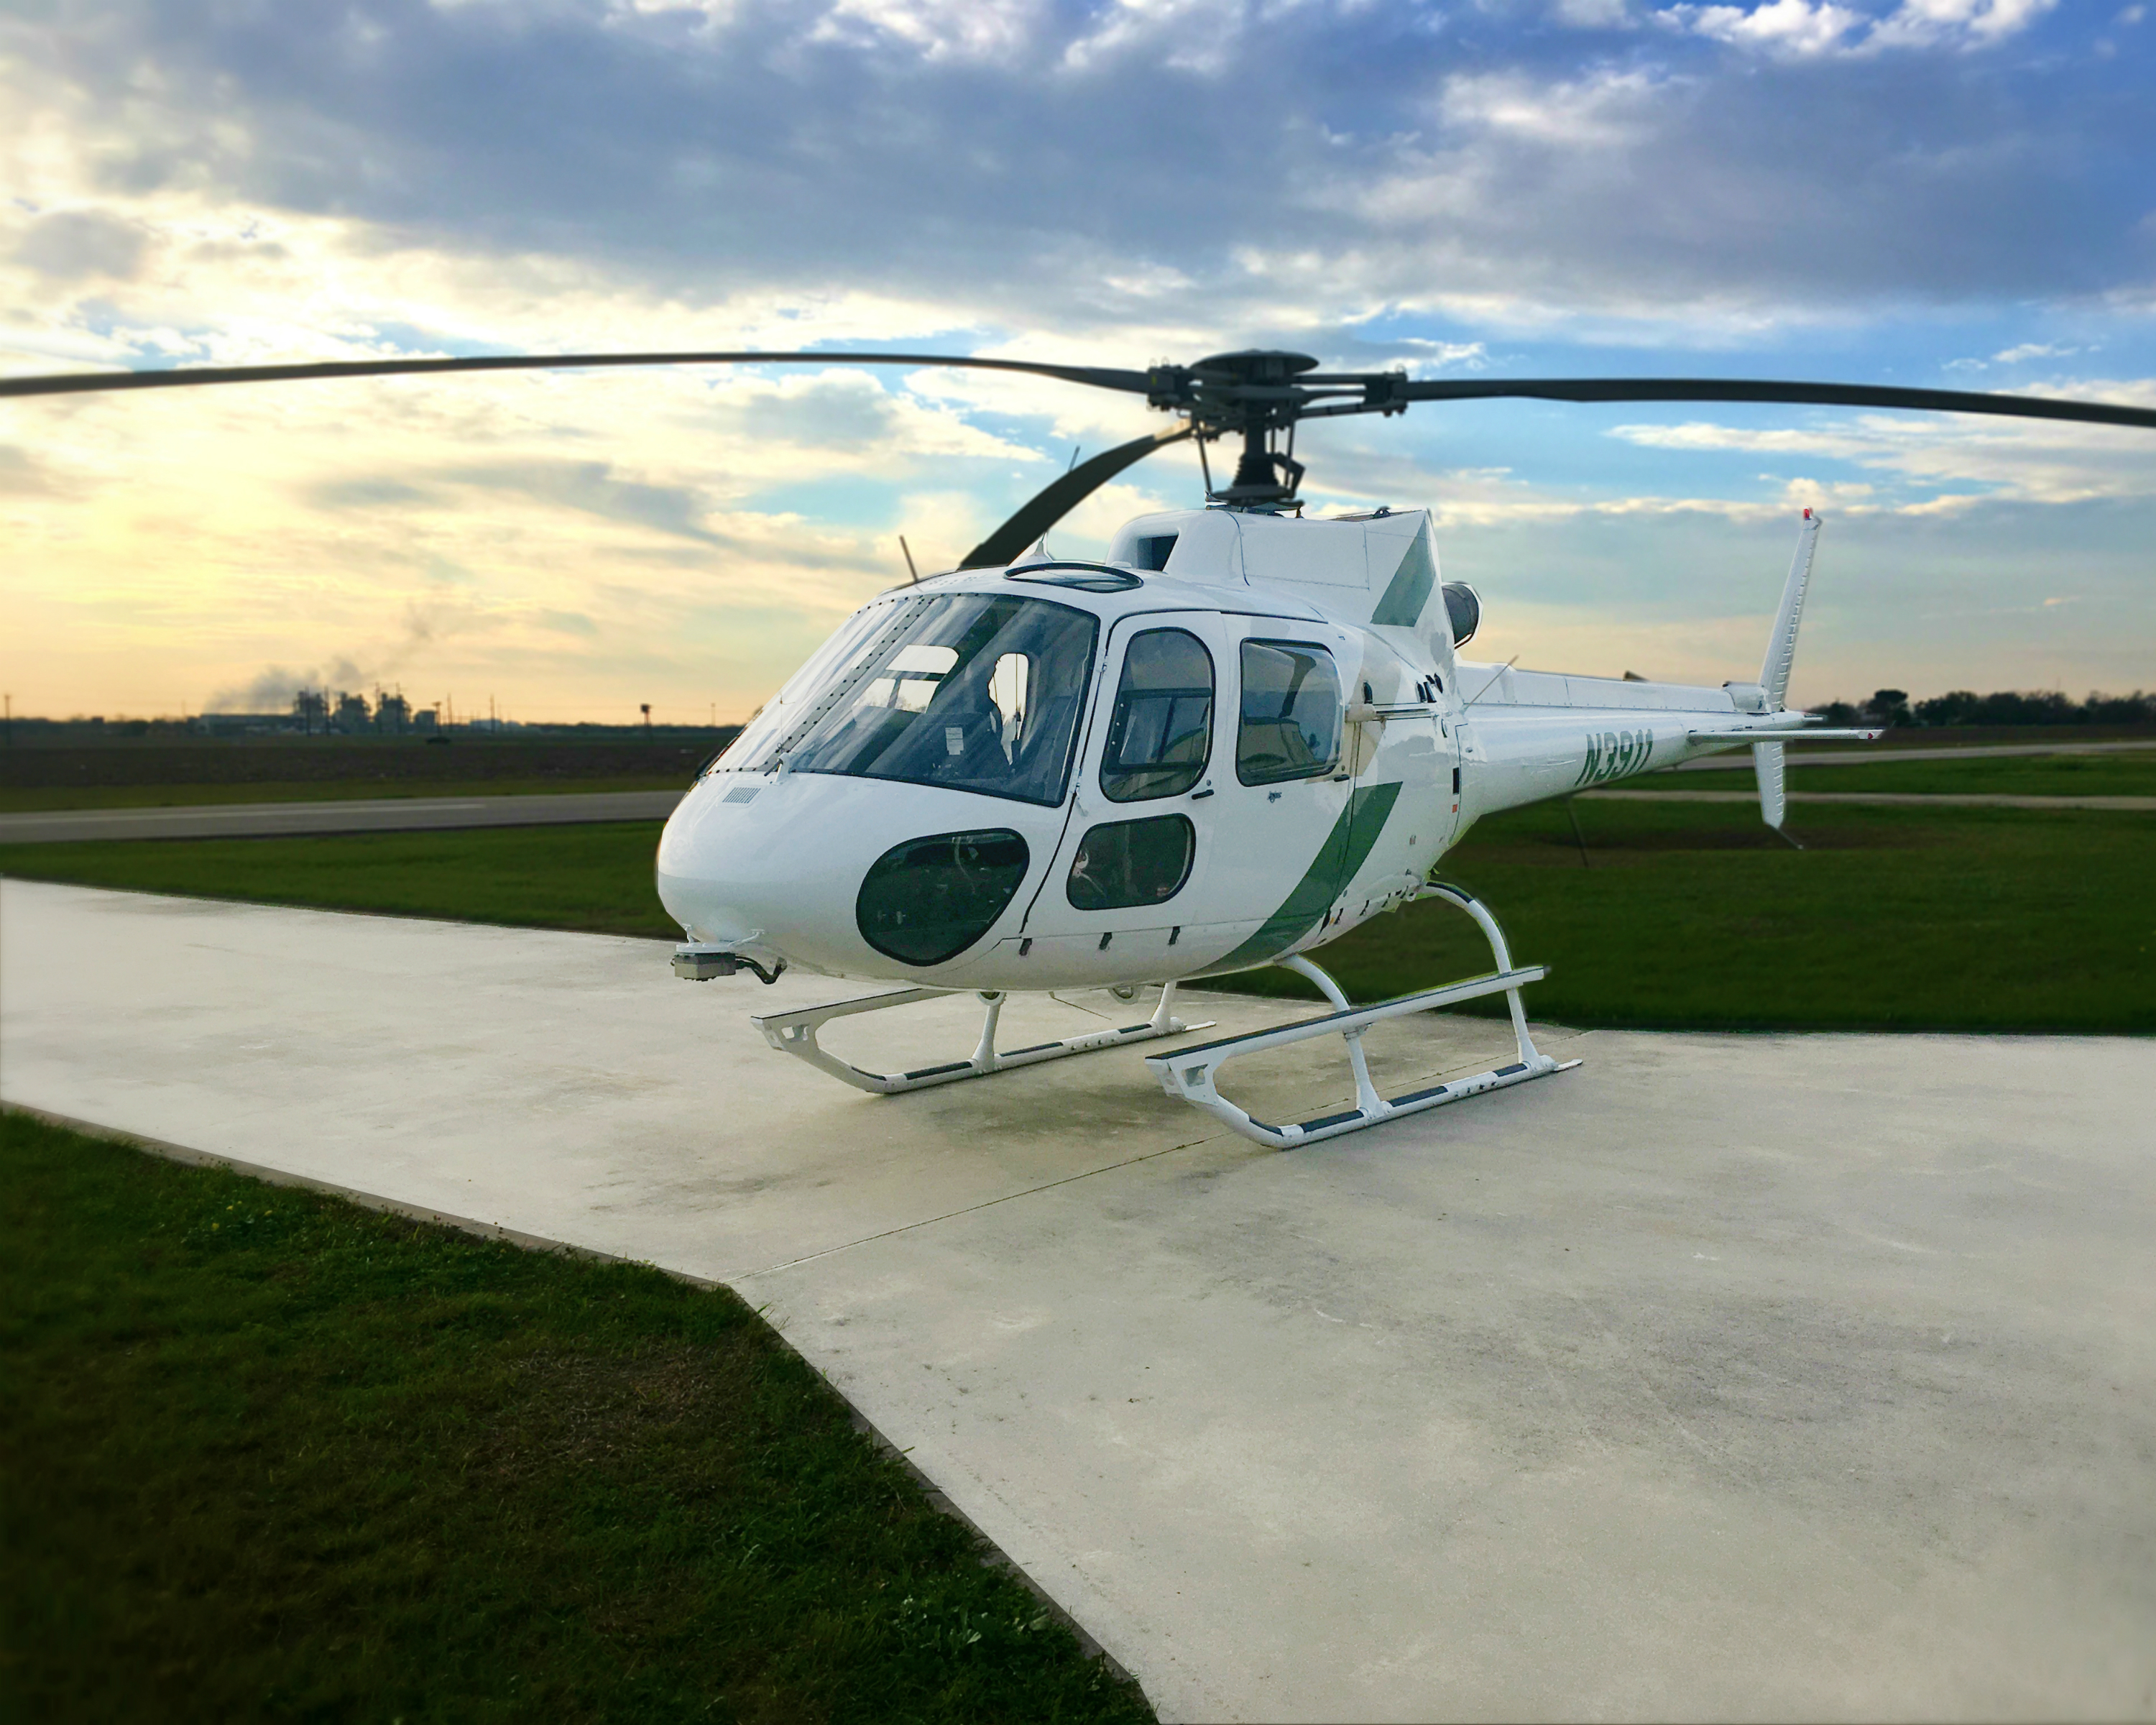 White and green helicopter for sale.